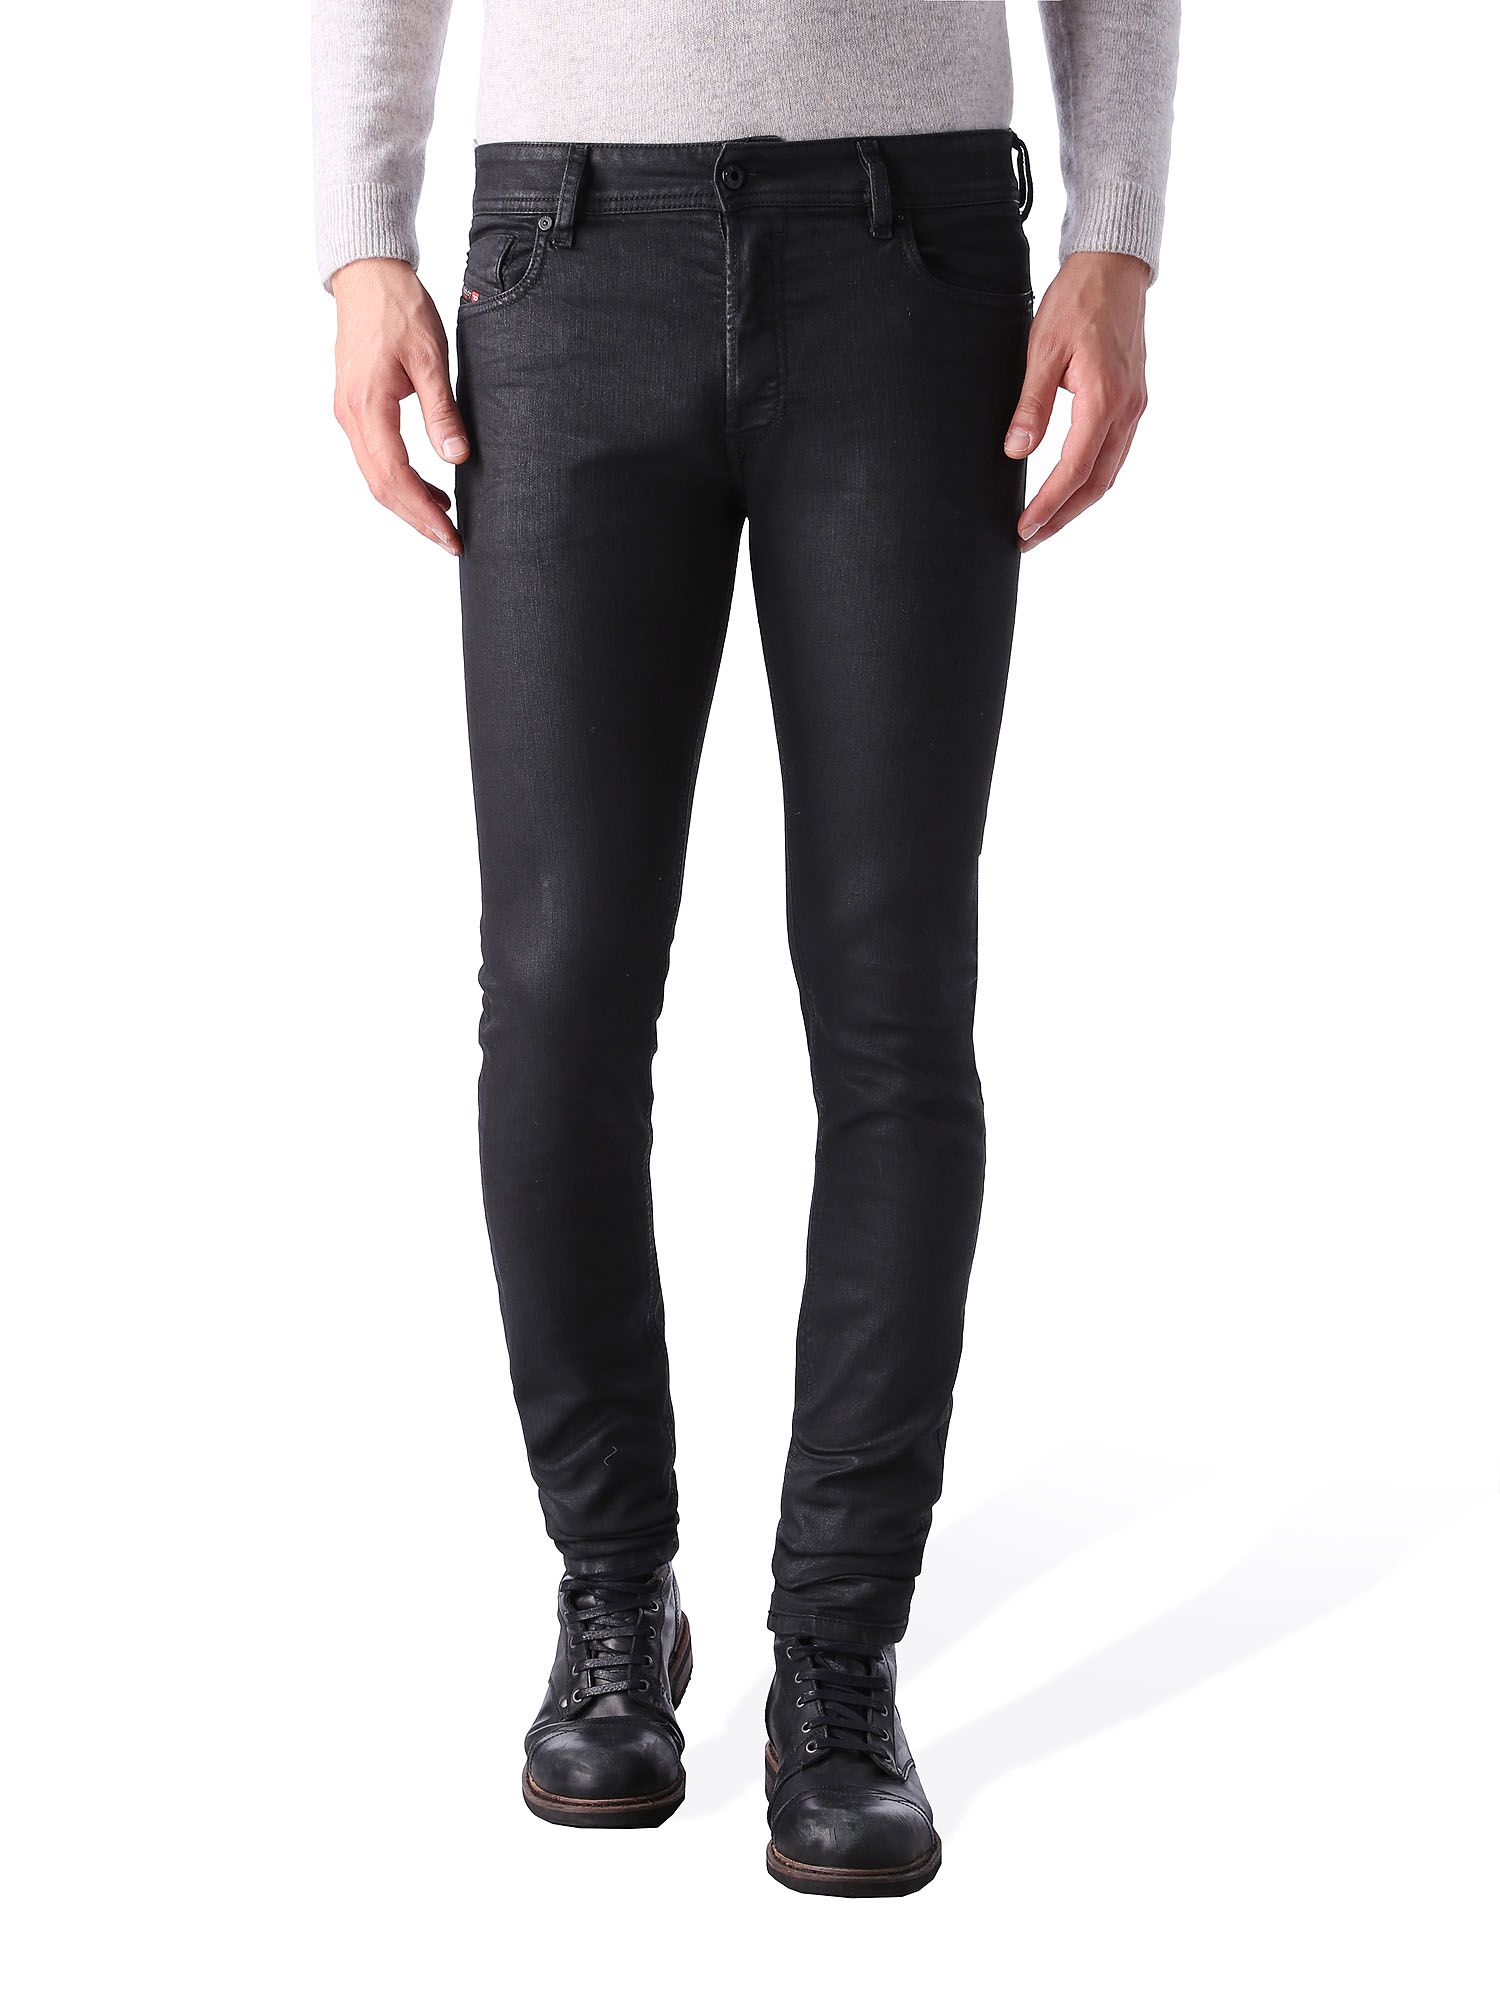 10 Must Have Fall Skinny Jeans For Men - THE JEANS BLOG